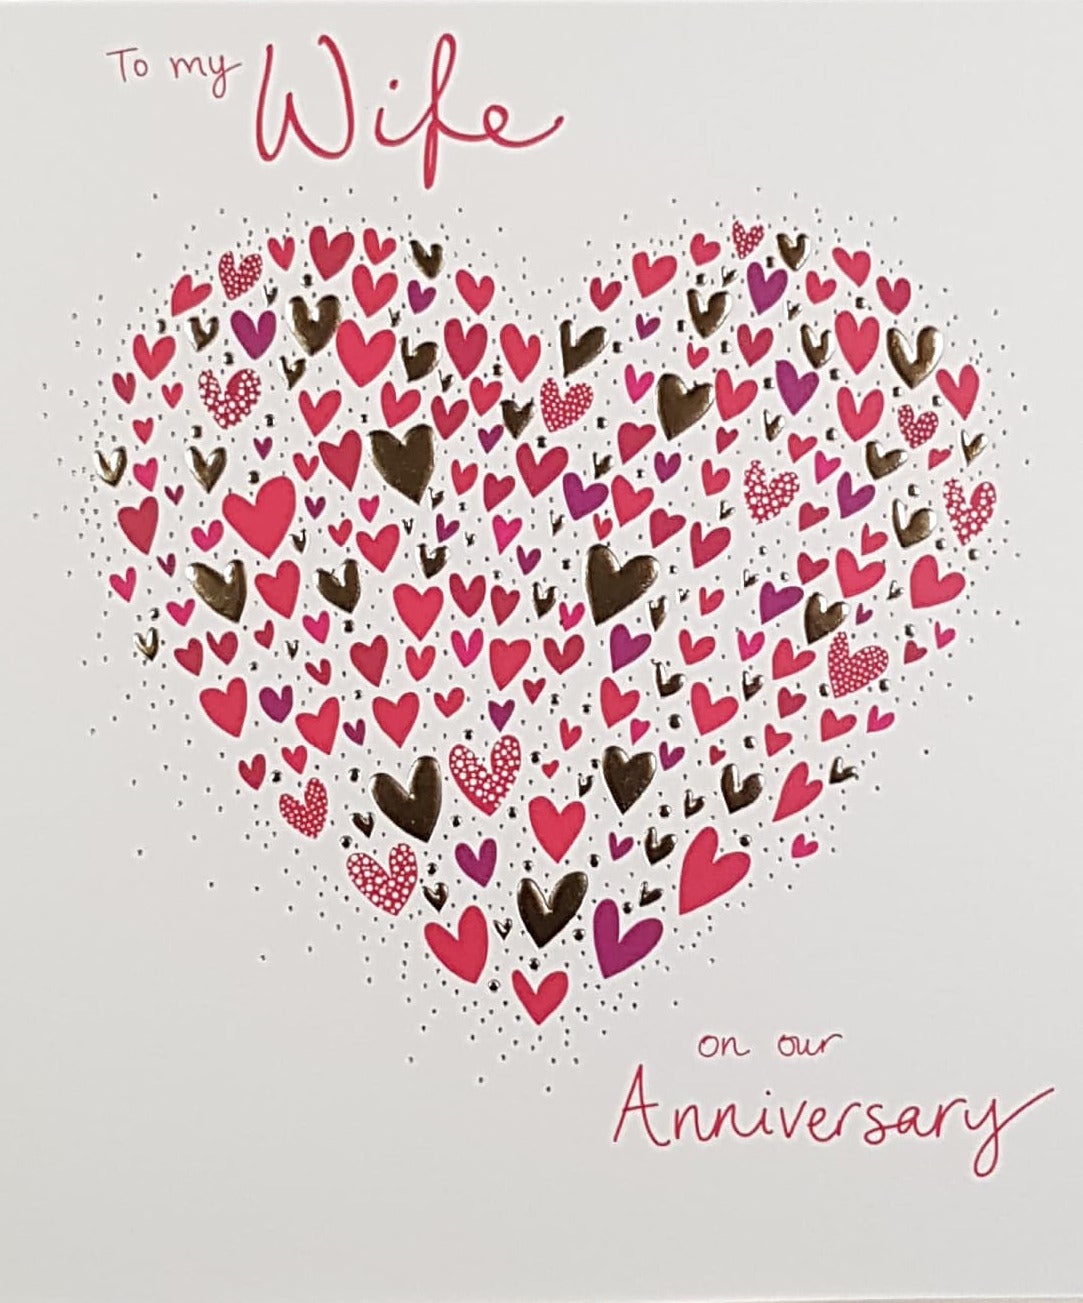 Anniversary Card - Wife / A Big Heart Made Of Small Red & Gold Hearts